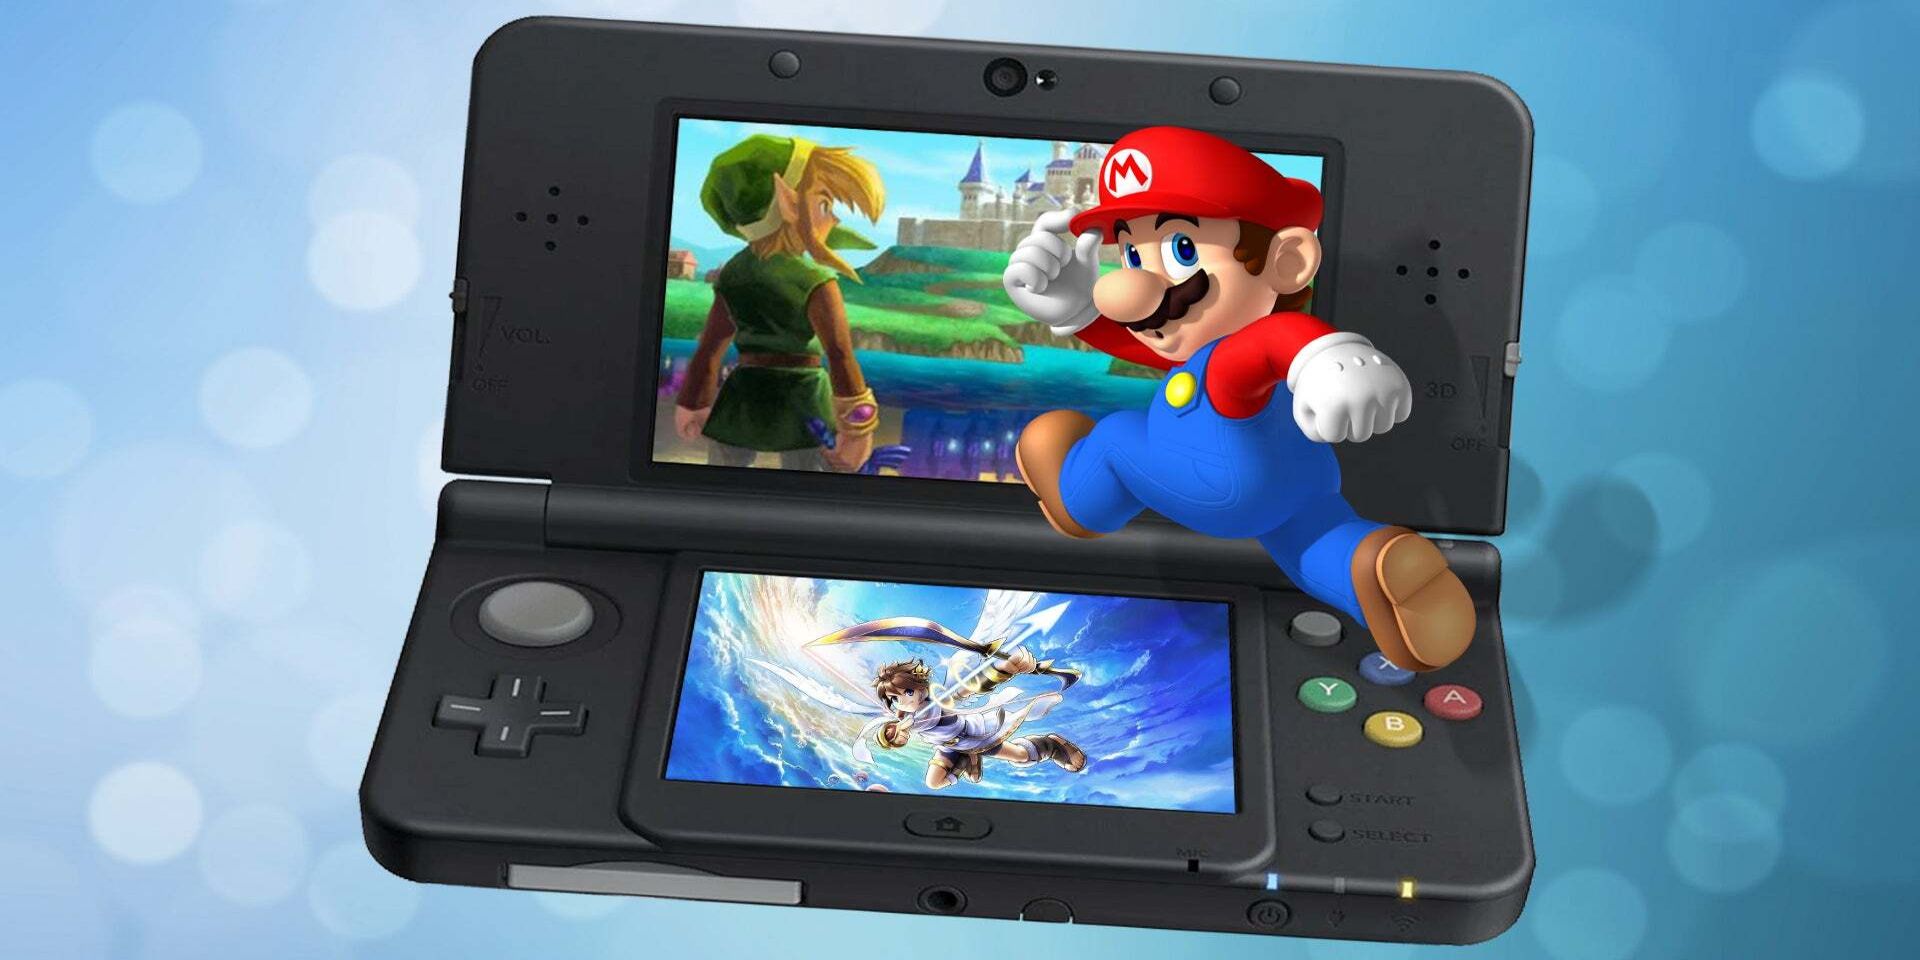 A promotional image for the Nintendo 3DS.